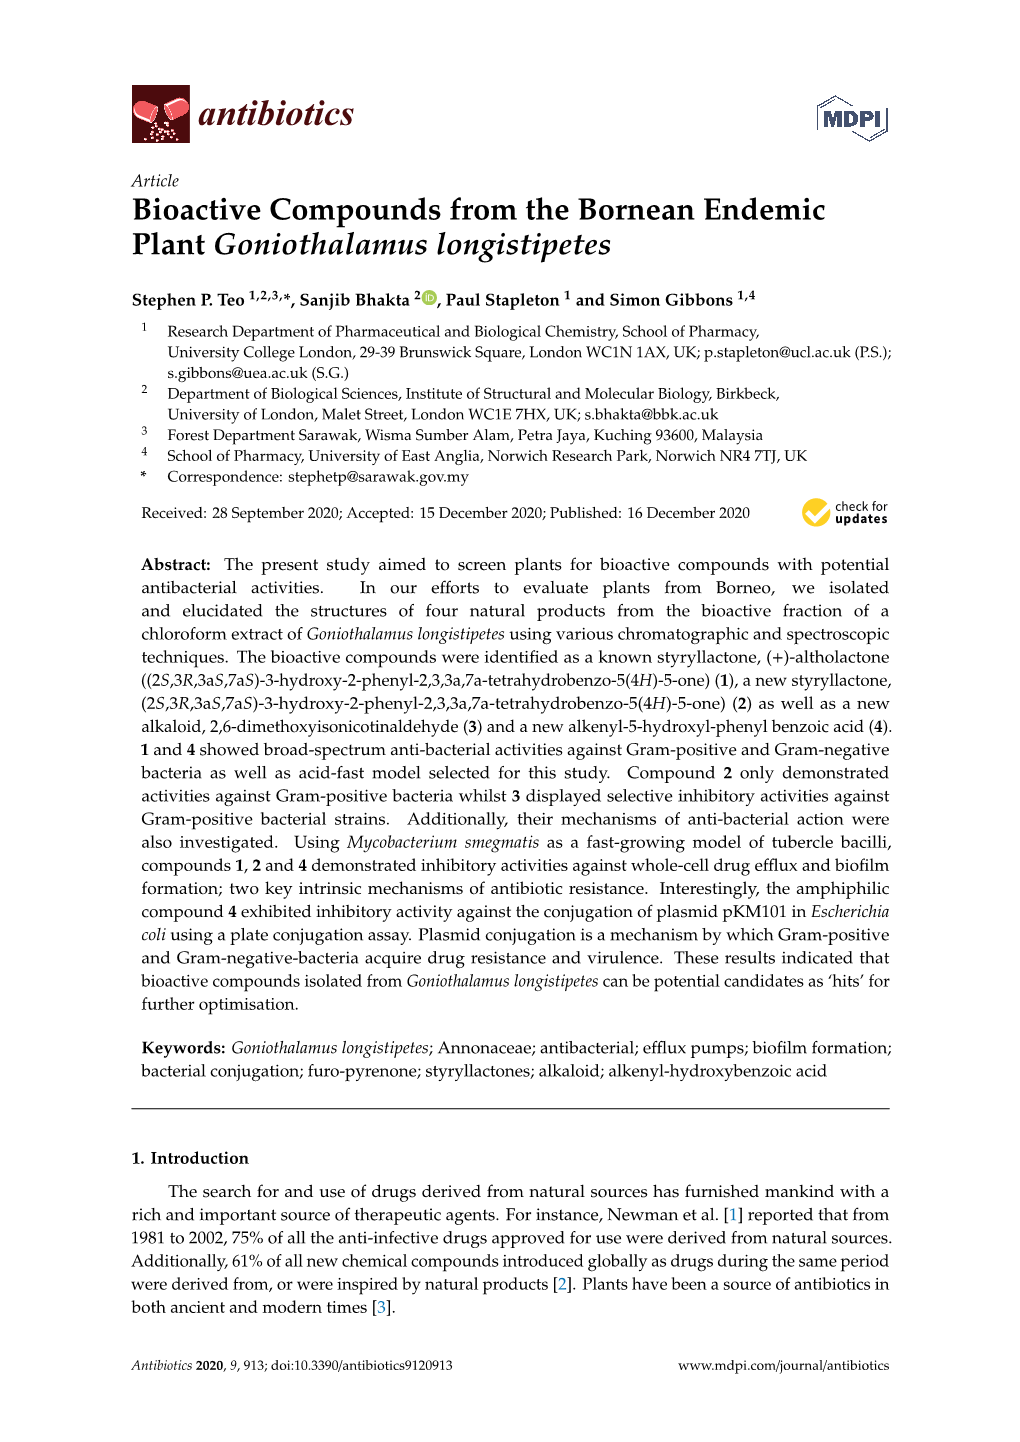 Bioactive Compounds from the Bornean Endemic Plant Goniothalamus Longistipetes